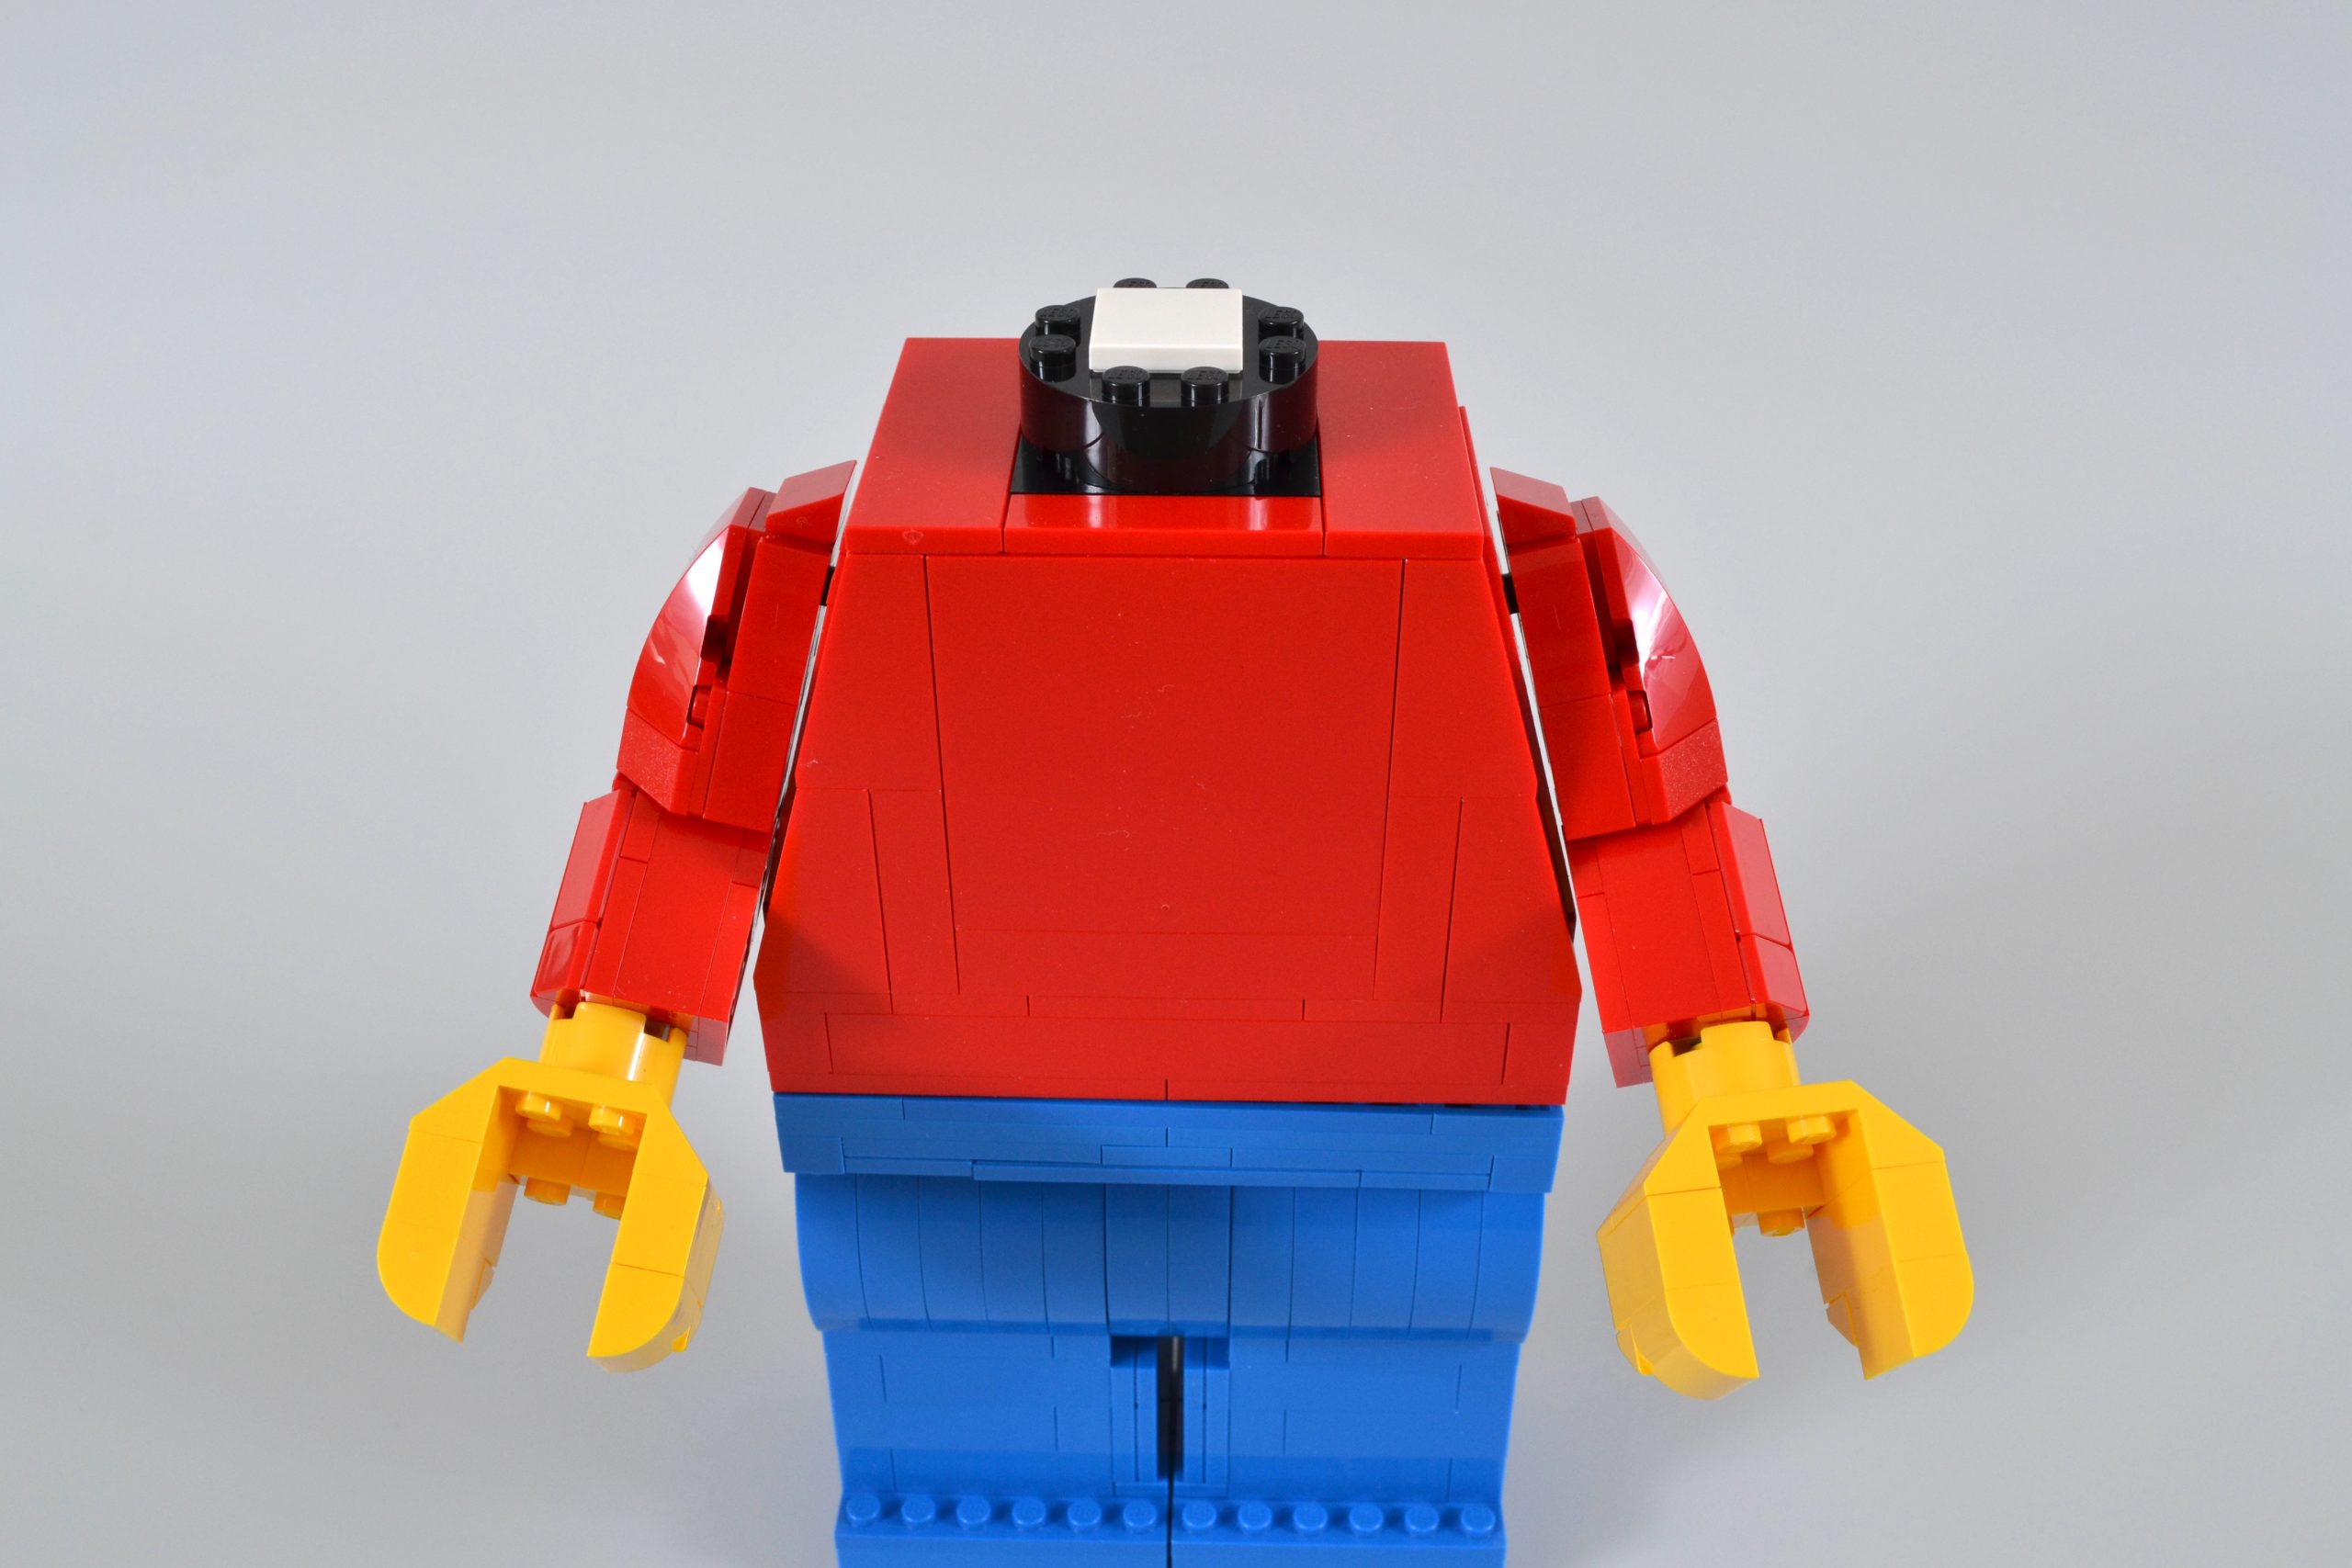 LEGO 40649 Up-Scaled LEGO Minifigure review